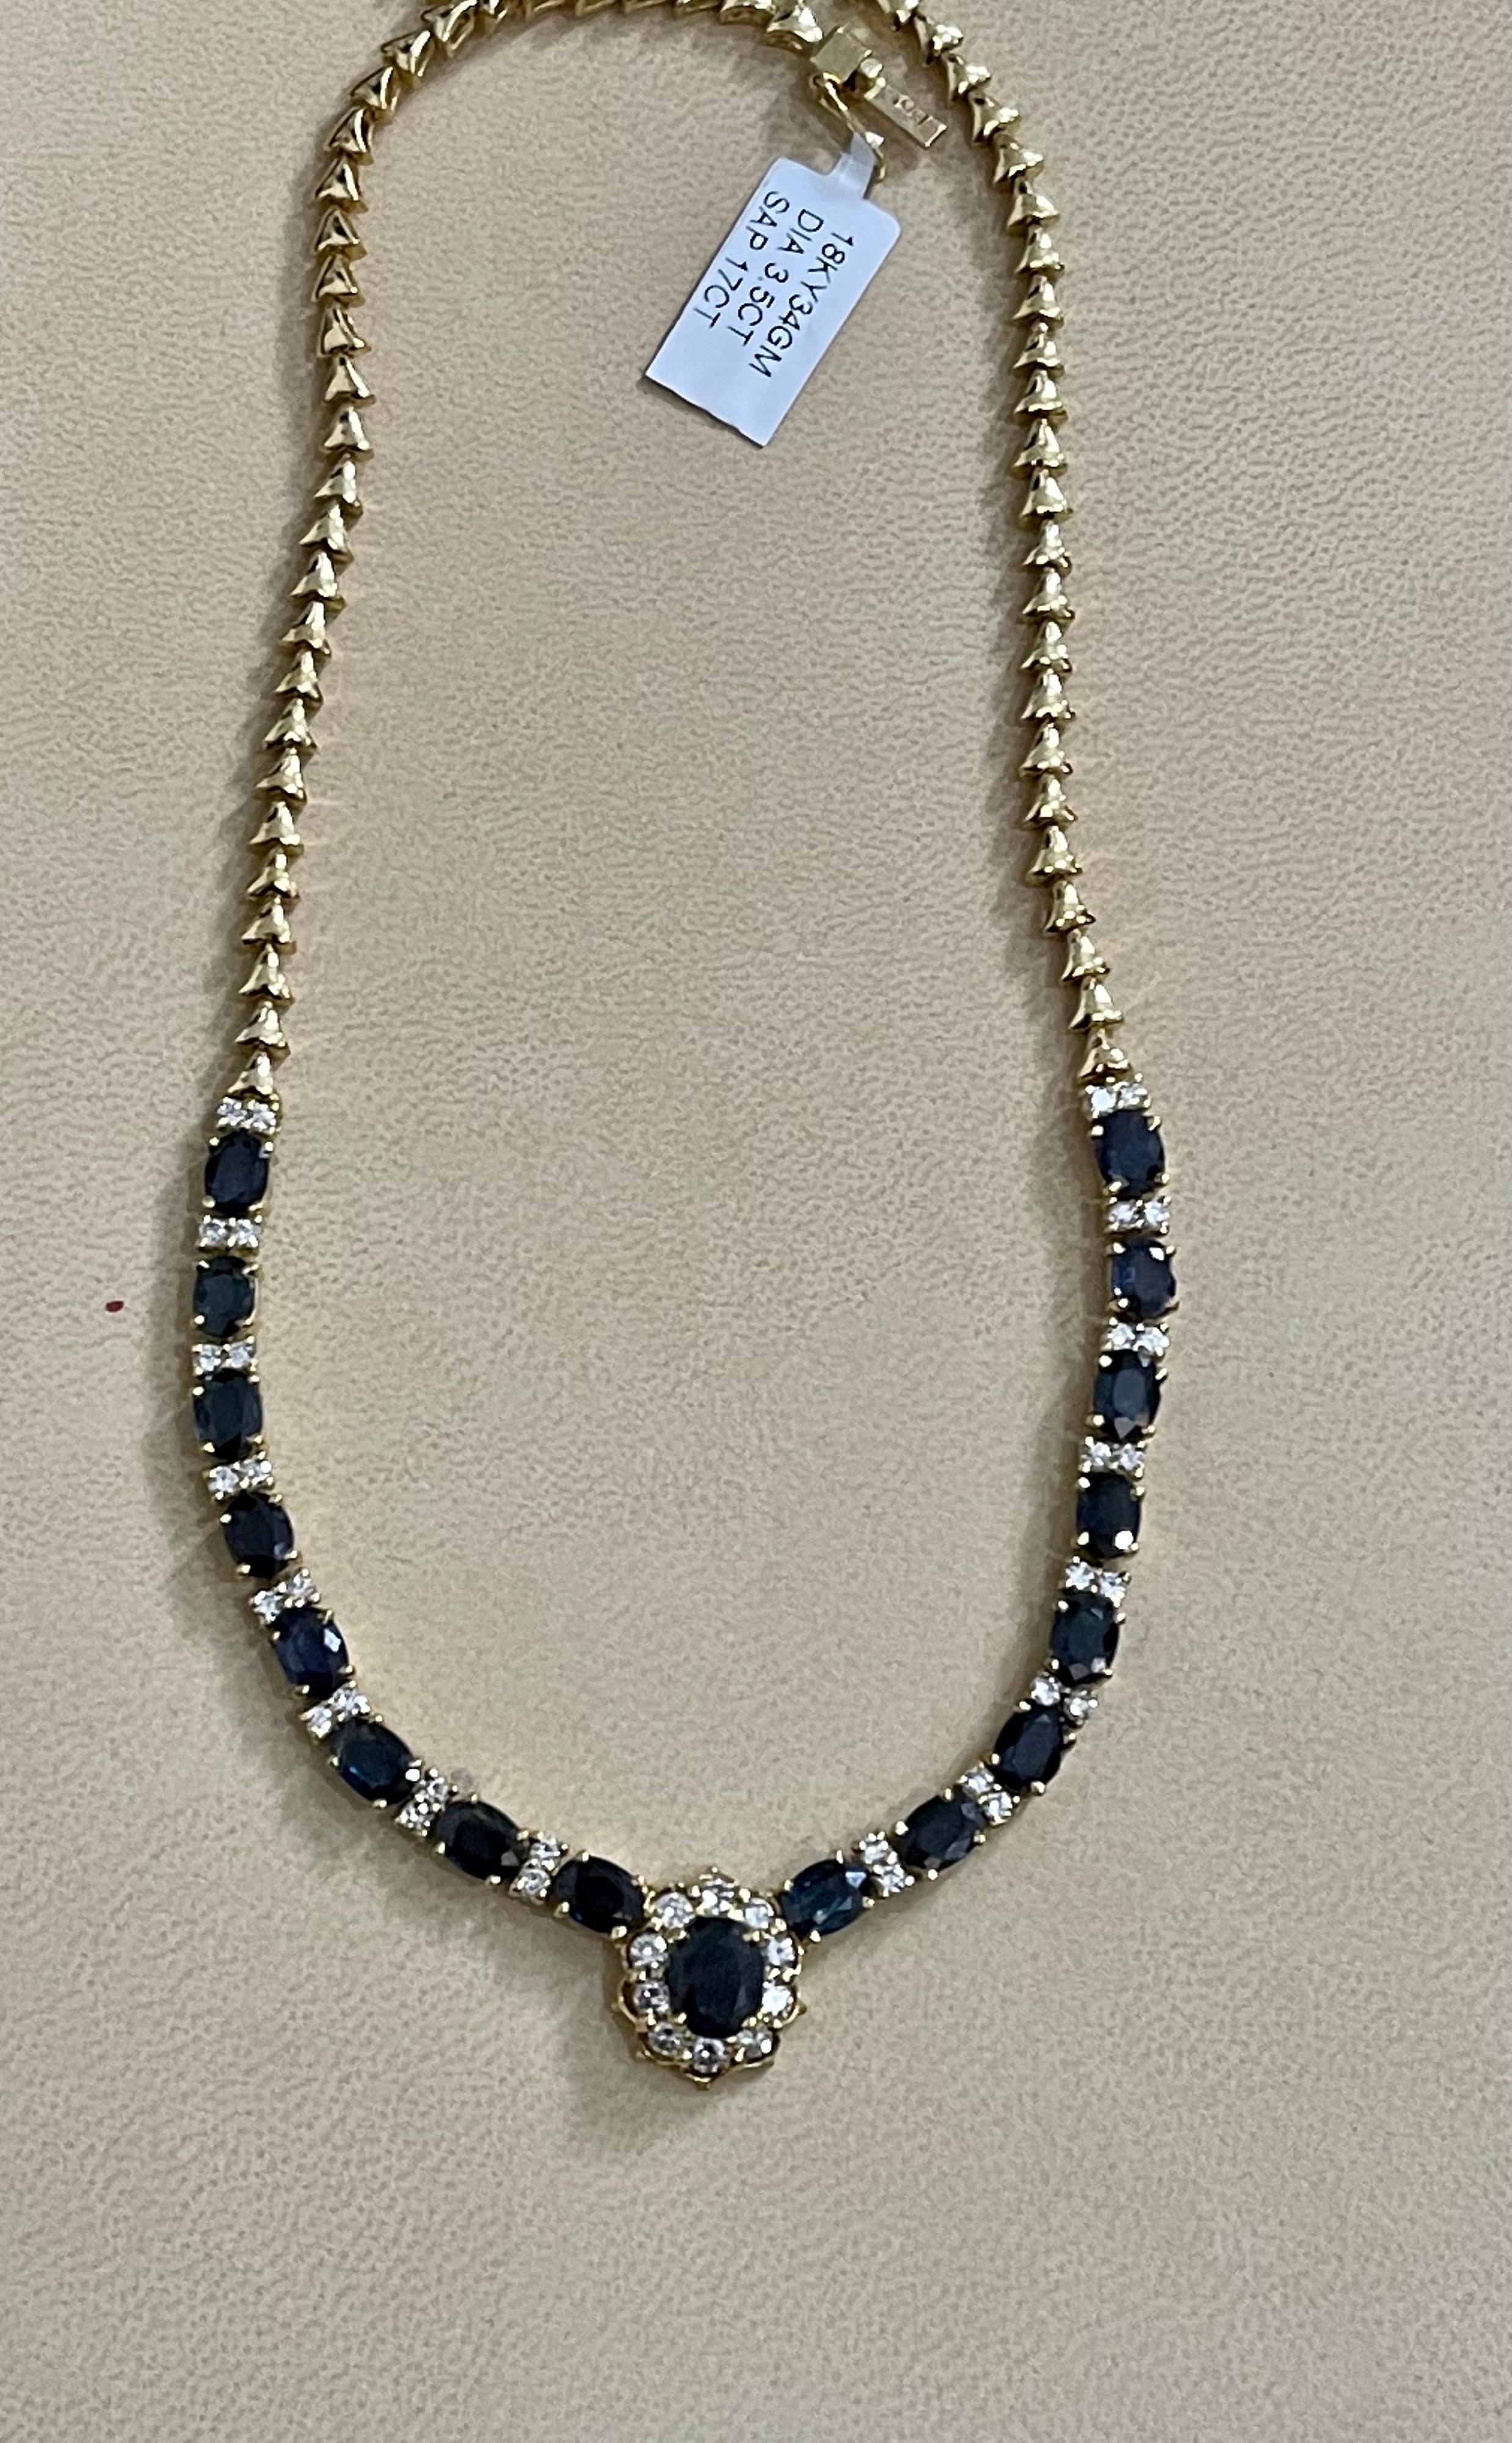 17 Carat Oval Sapphire and 3.5 Carat Diamonds Necklace 18 Karat Yellow Gold For Sale 4